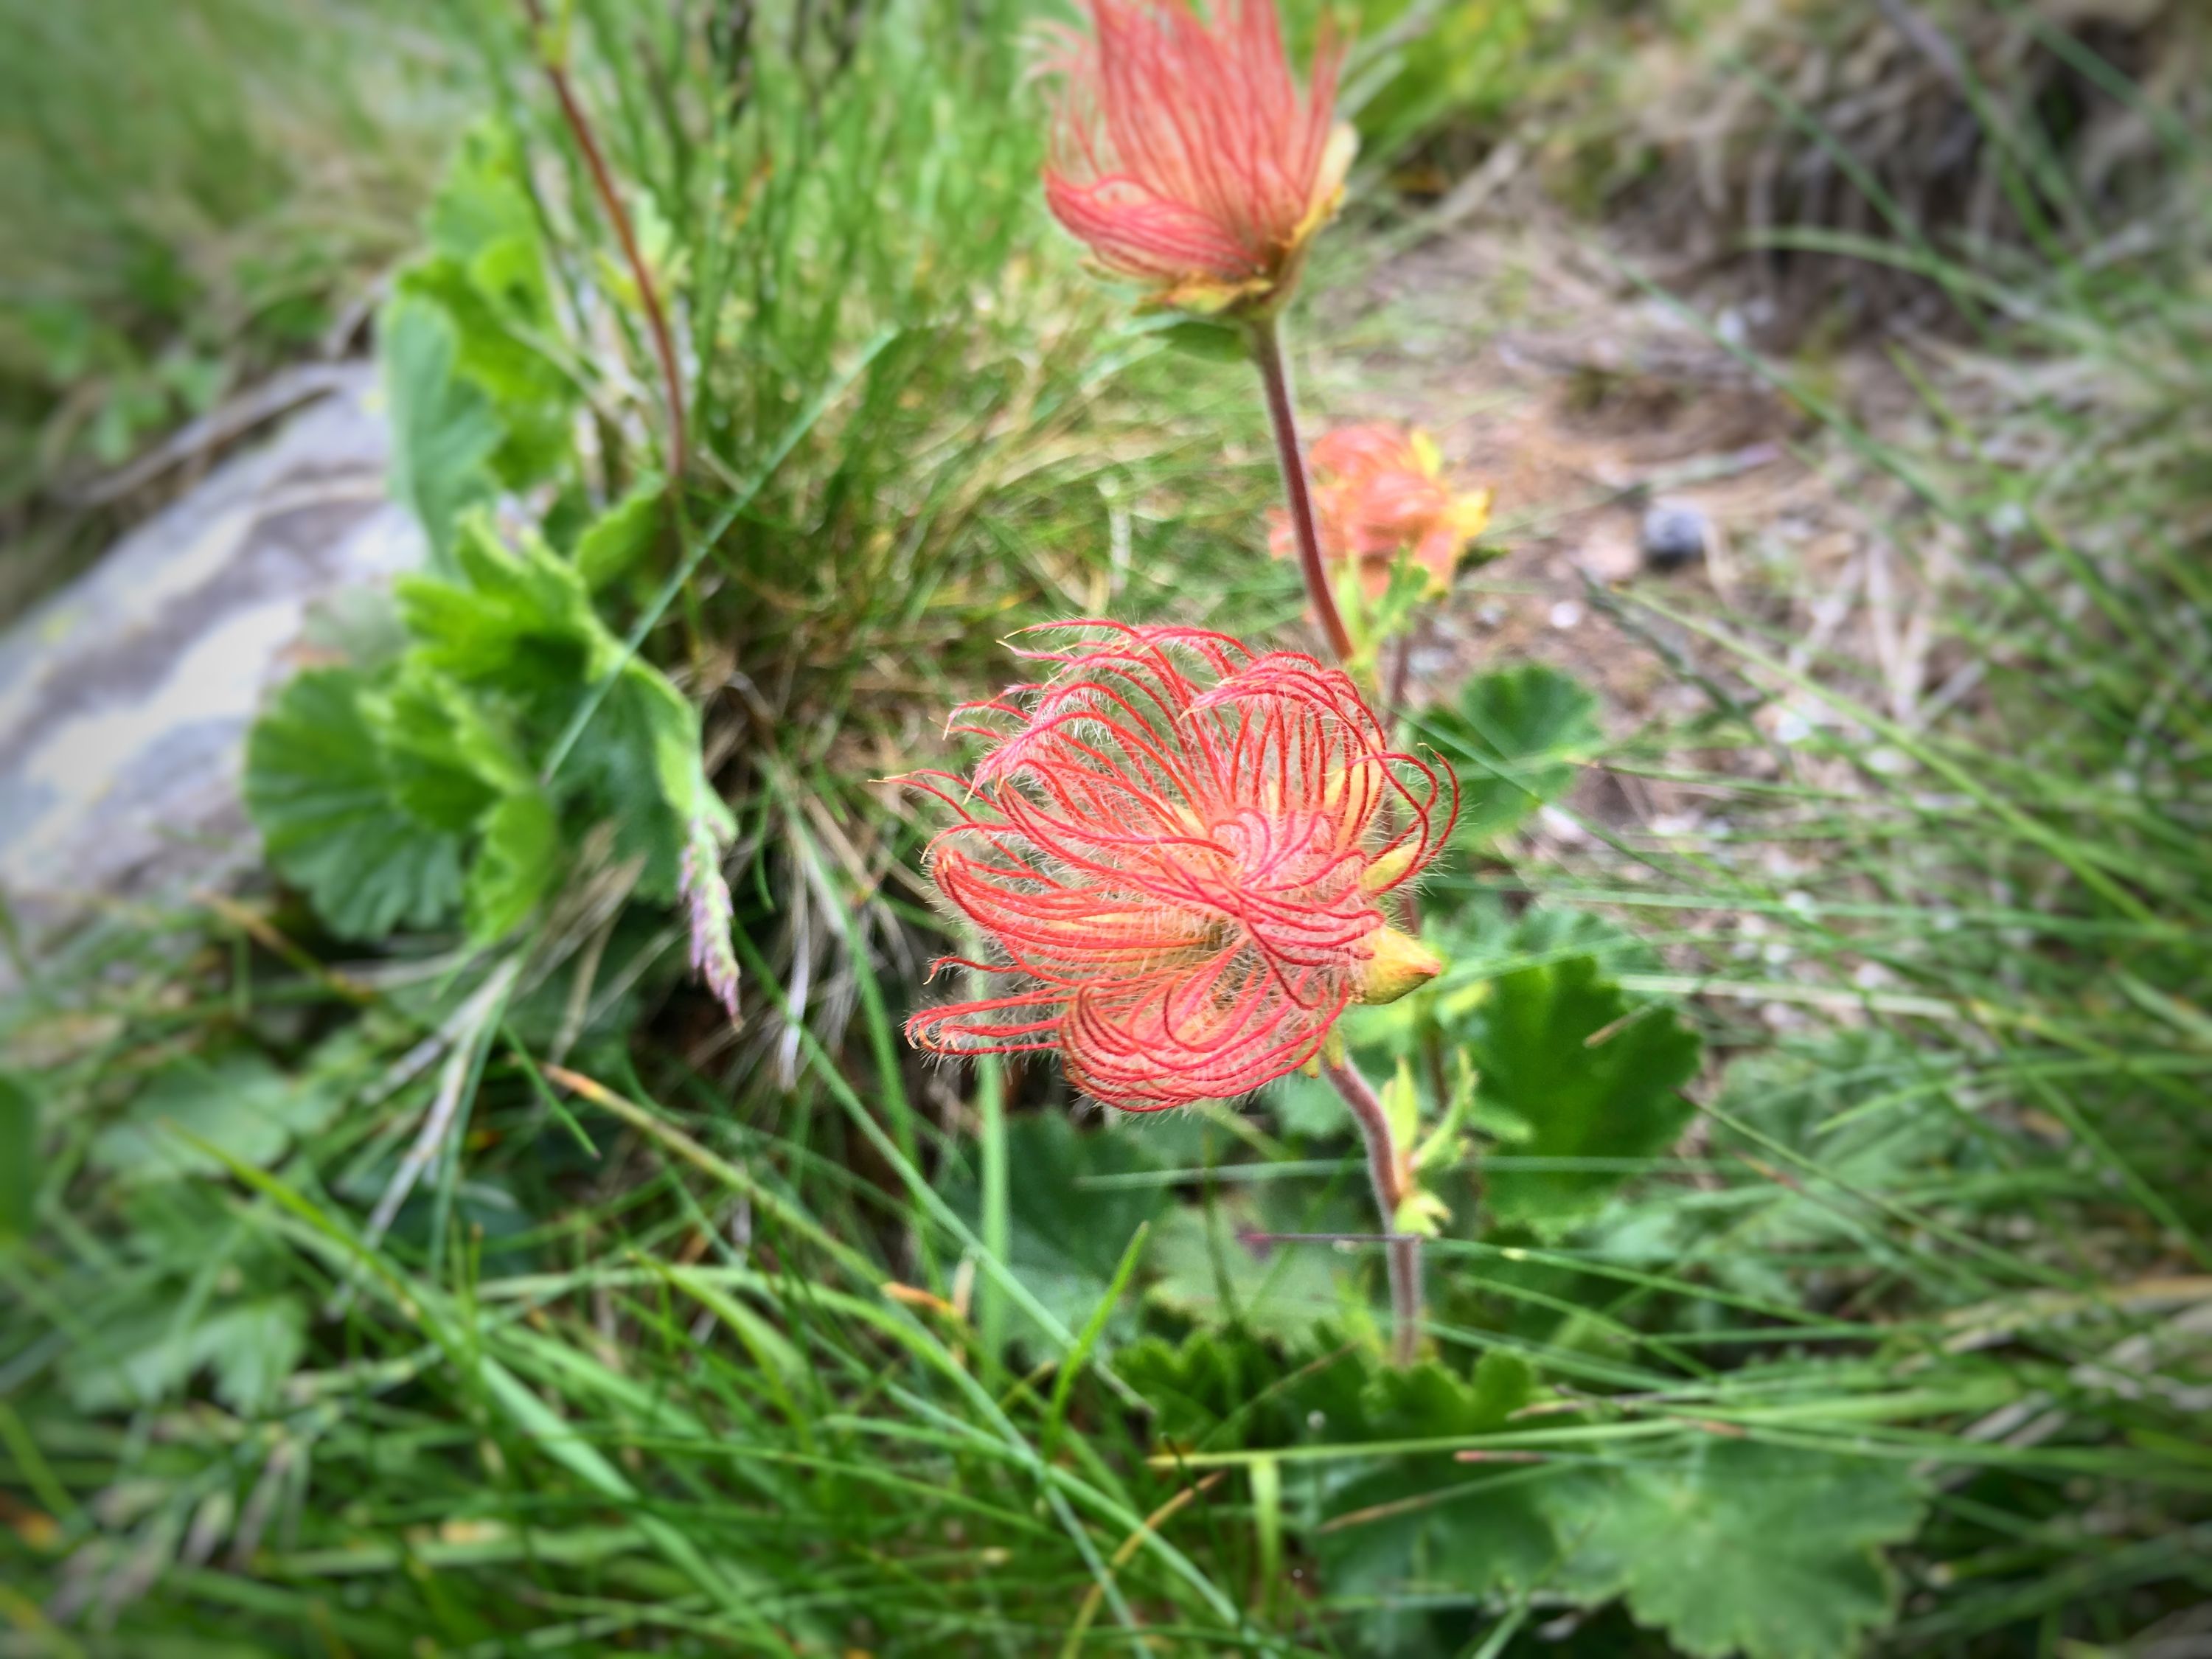 It looks like an alien flower, but it’s actually the seed head of an alpine avens (Geum montanum). iPhone 6s Plus: 1/216 @ ƒ/2.2, ISO 25